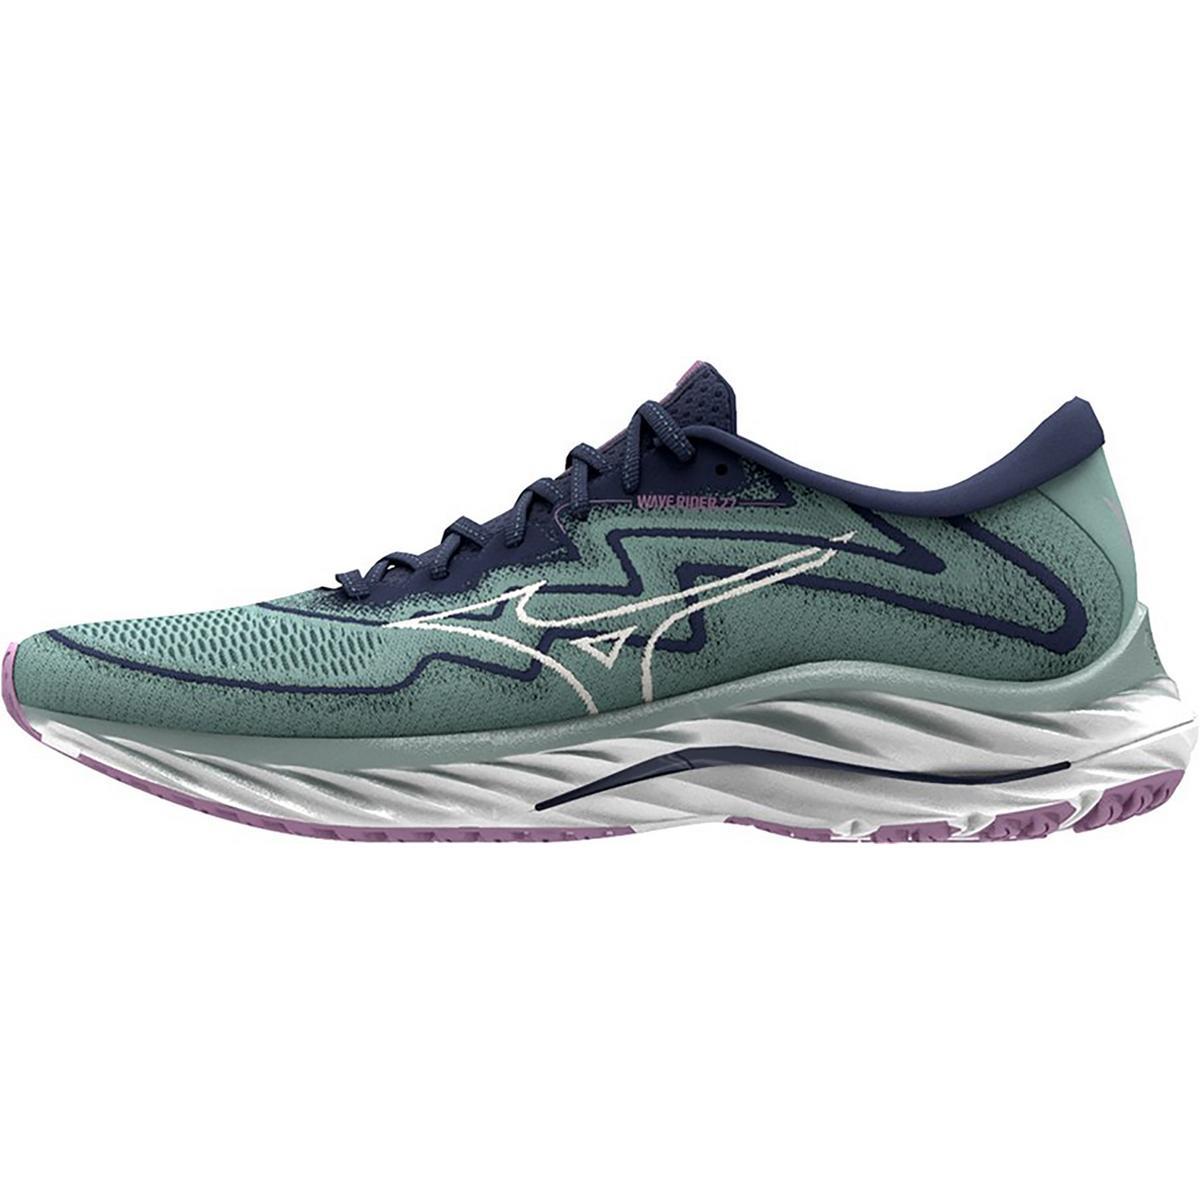 Mizuno Womens Wave Rider 27 Ssw Casual and Fashion Sneakers Shoes Bhfo 3007